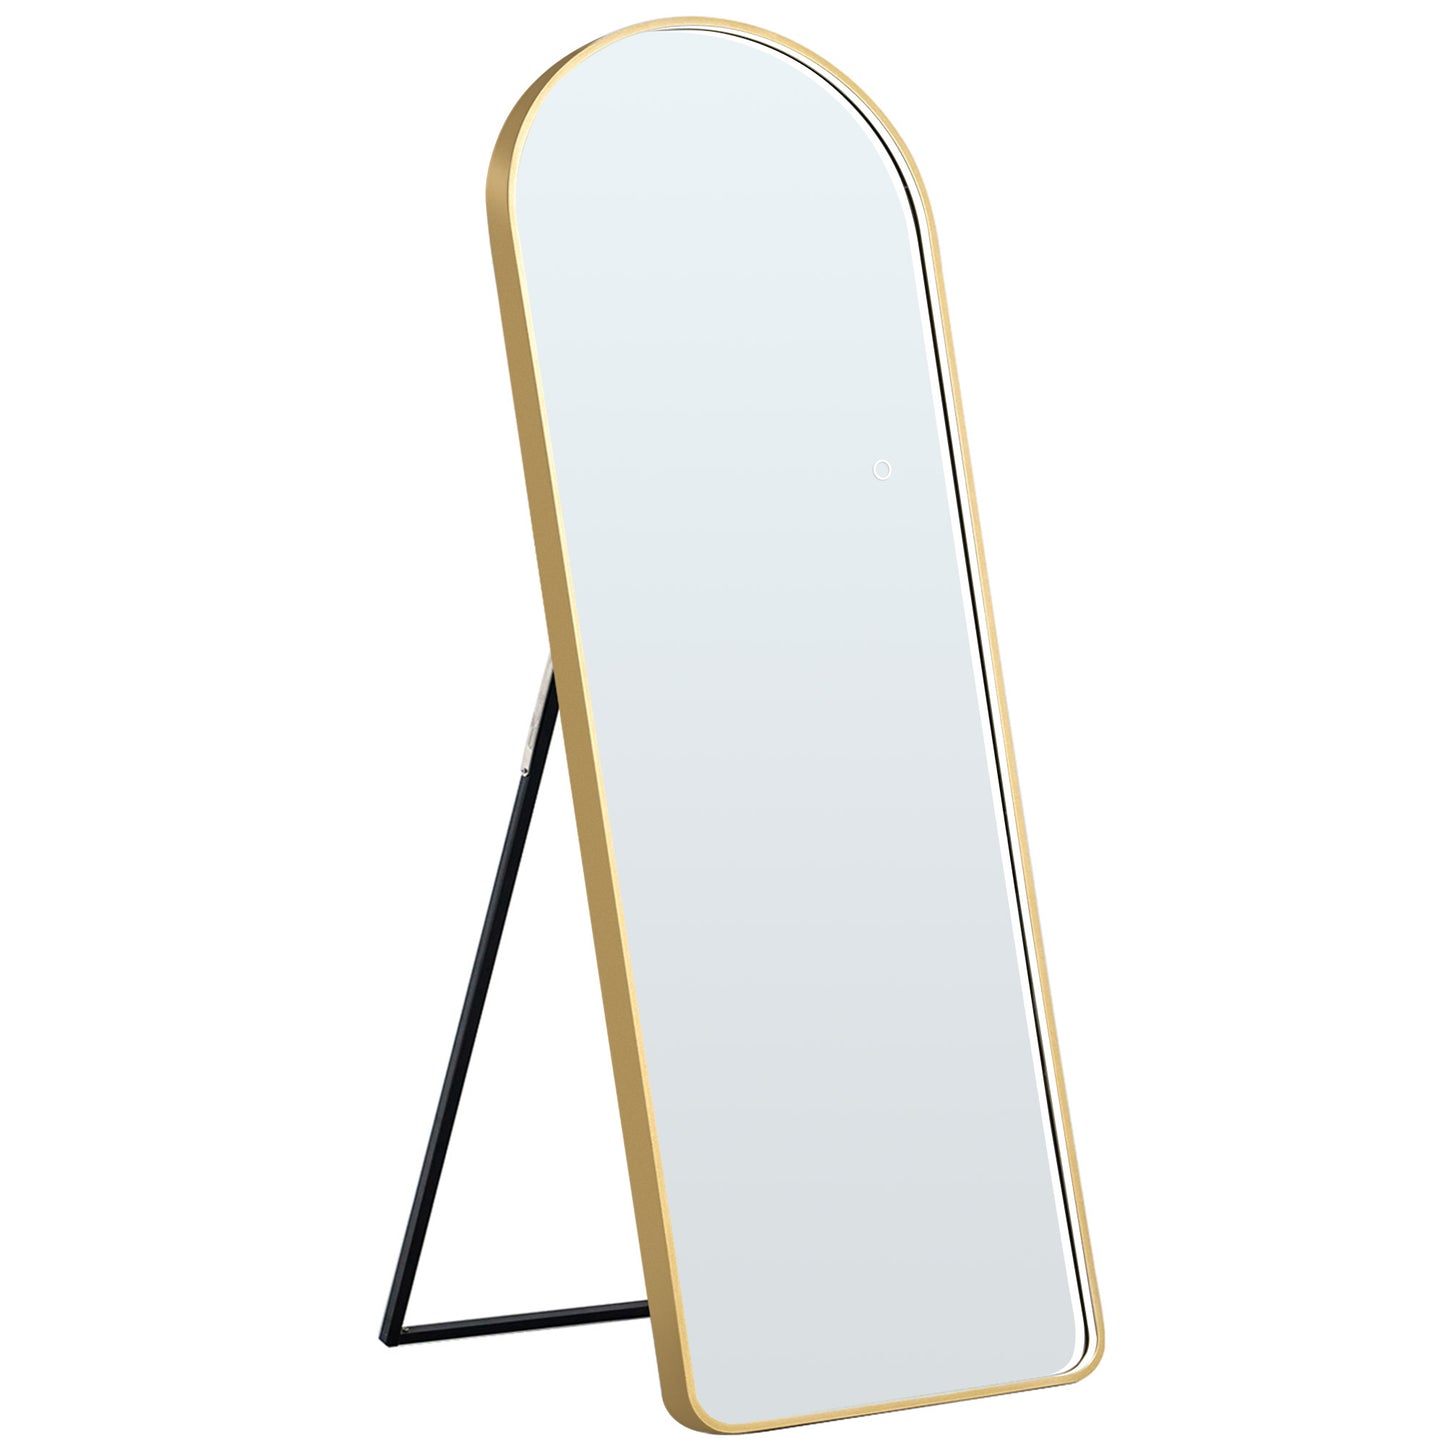 Soges Professional Full Length Mirror with Arched Design, LED Lights and Storage - Floor Standing Dressing Mirror Golden